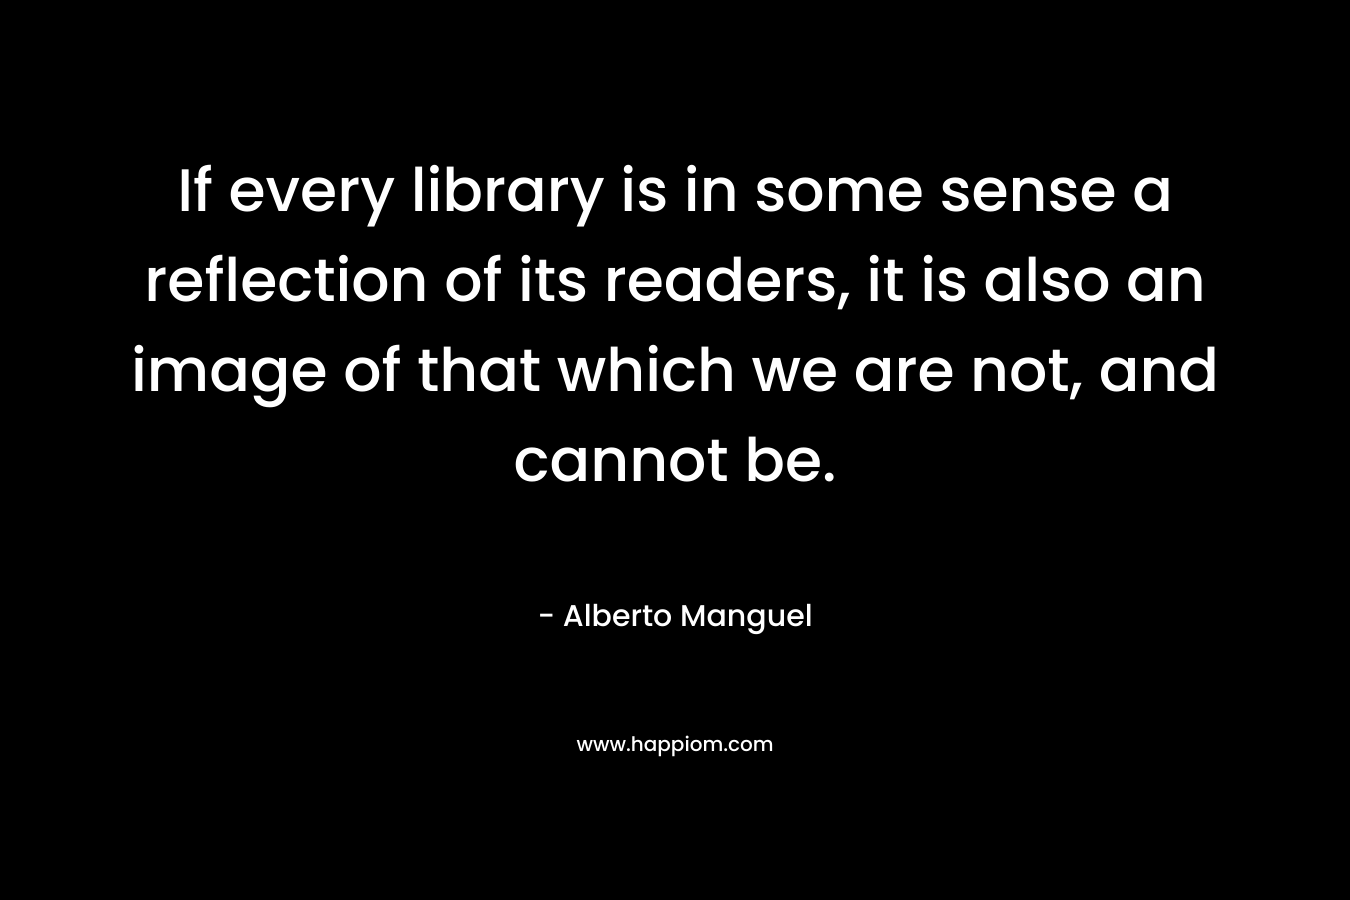 If every library is in some sense a reflection of its readers, it is also an image of that which we are not, and cannot be.